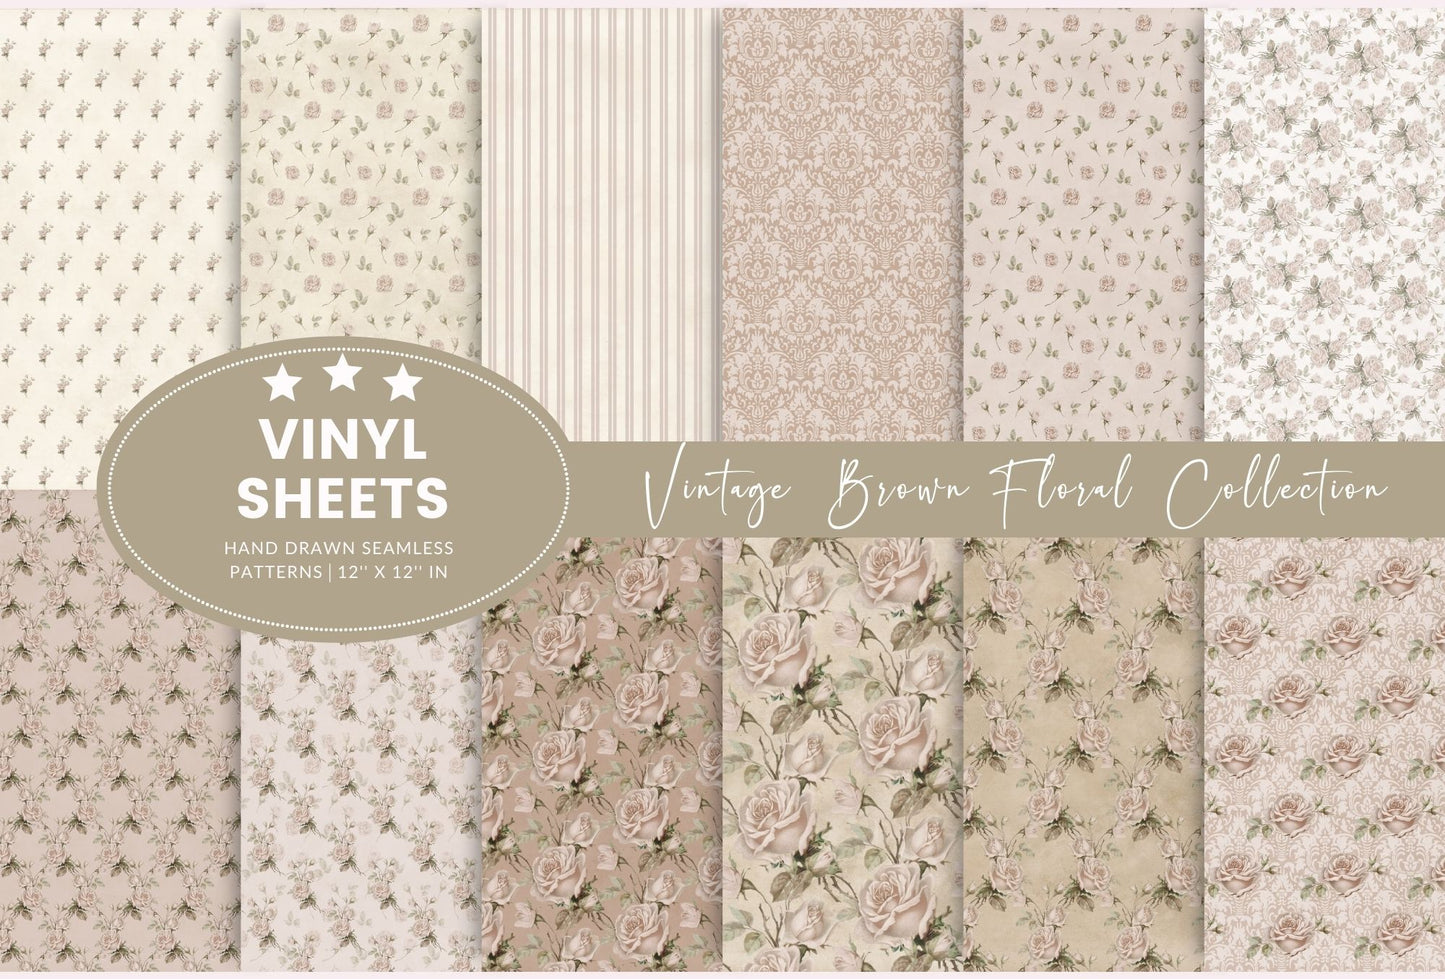 Vintage Brown Floral Collection 12x12 Vinyl sheets- 12 Designs available